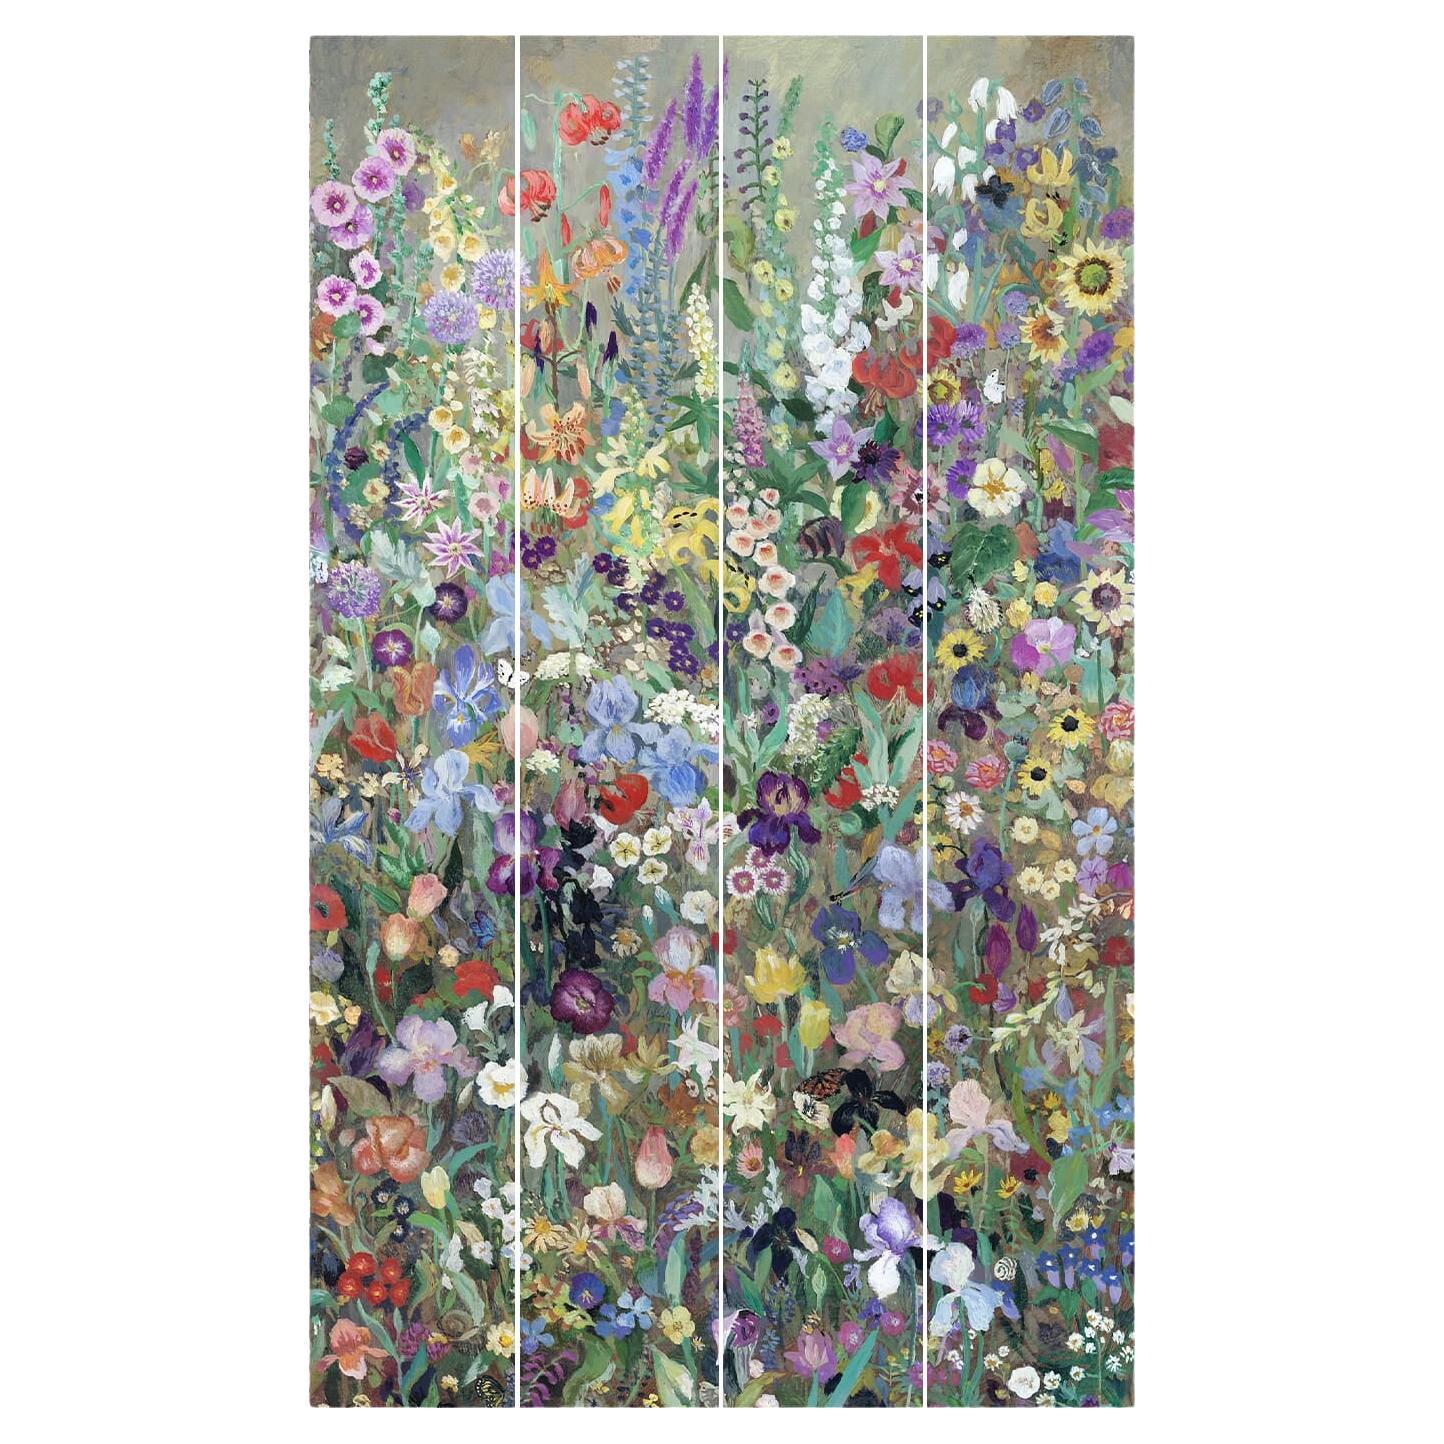 In the Victorian language of flowers, the wildflower symbolises joy; what better way to bring the joyful optimism of an English country garden into your interiors than with the painterly meadow that is FLORIBUNDA?

Our wallpaper is made using